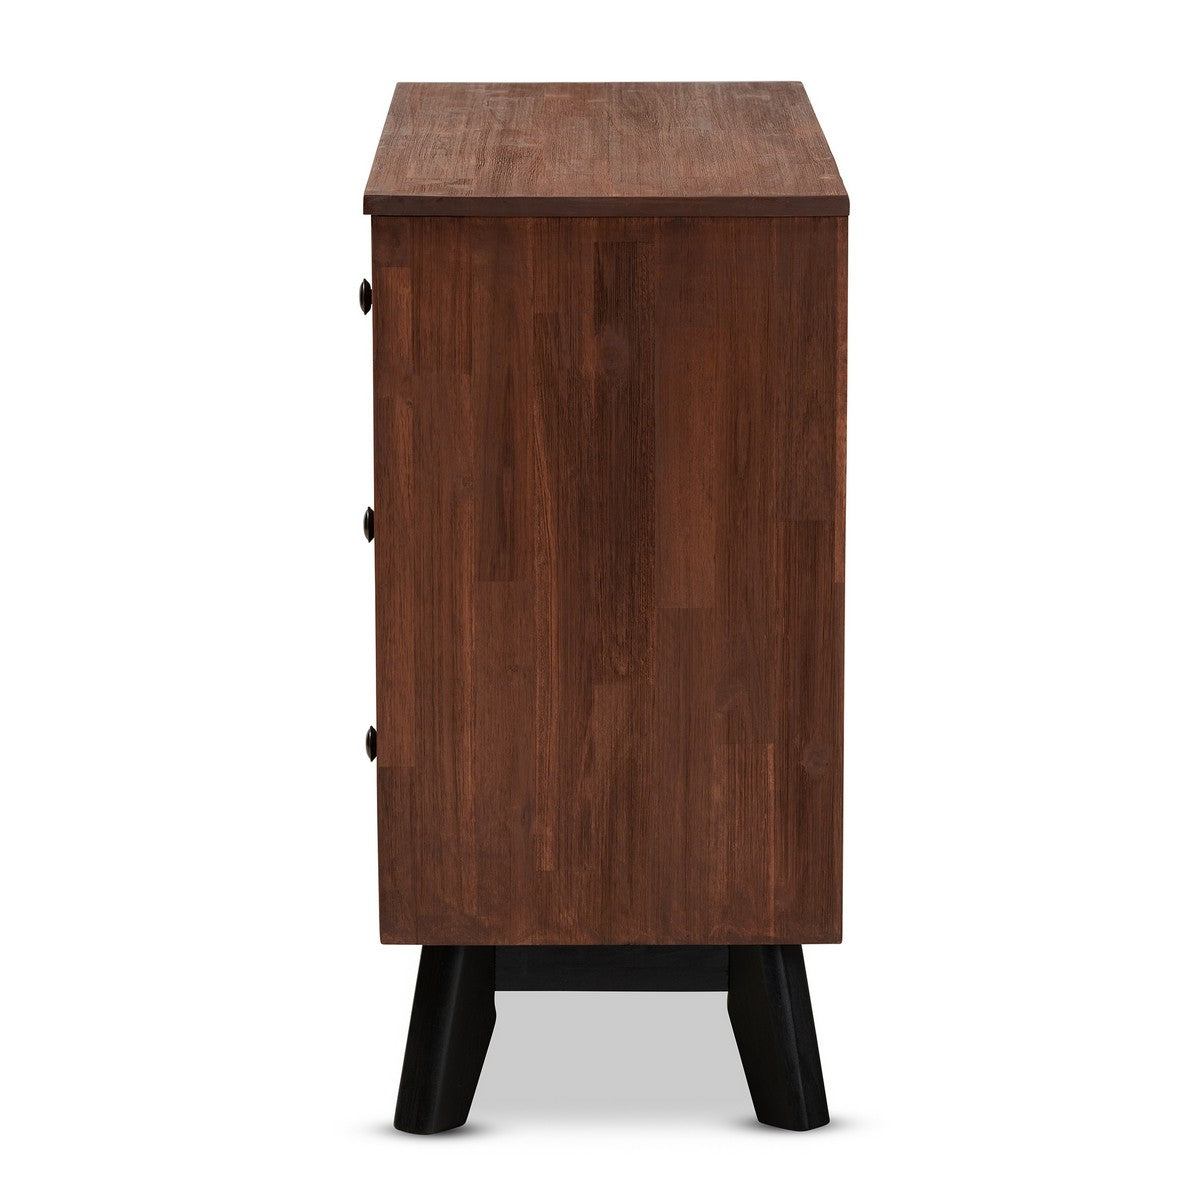 Baxton Studio Calla Modern and Contemporary Brown and Black Oak Finished 4-Drawer Wood Dresser